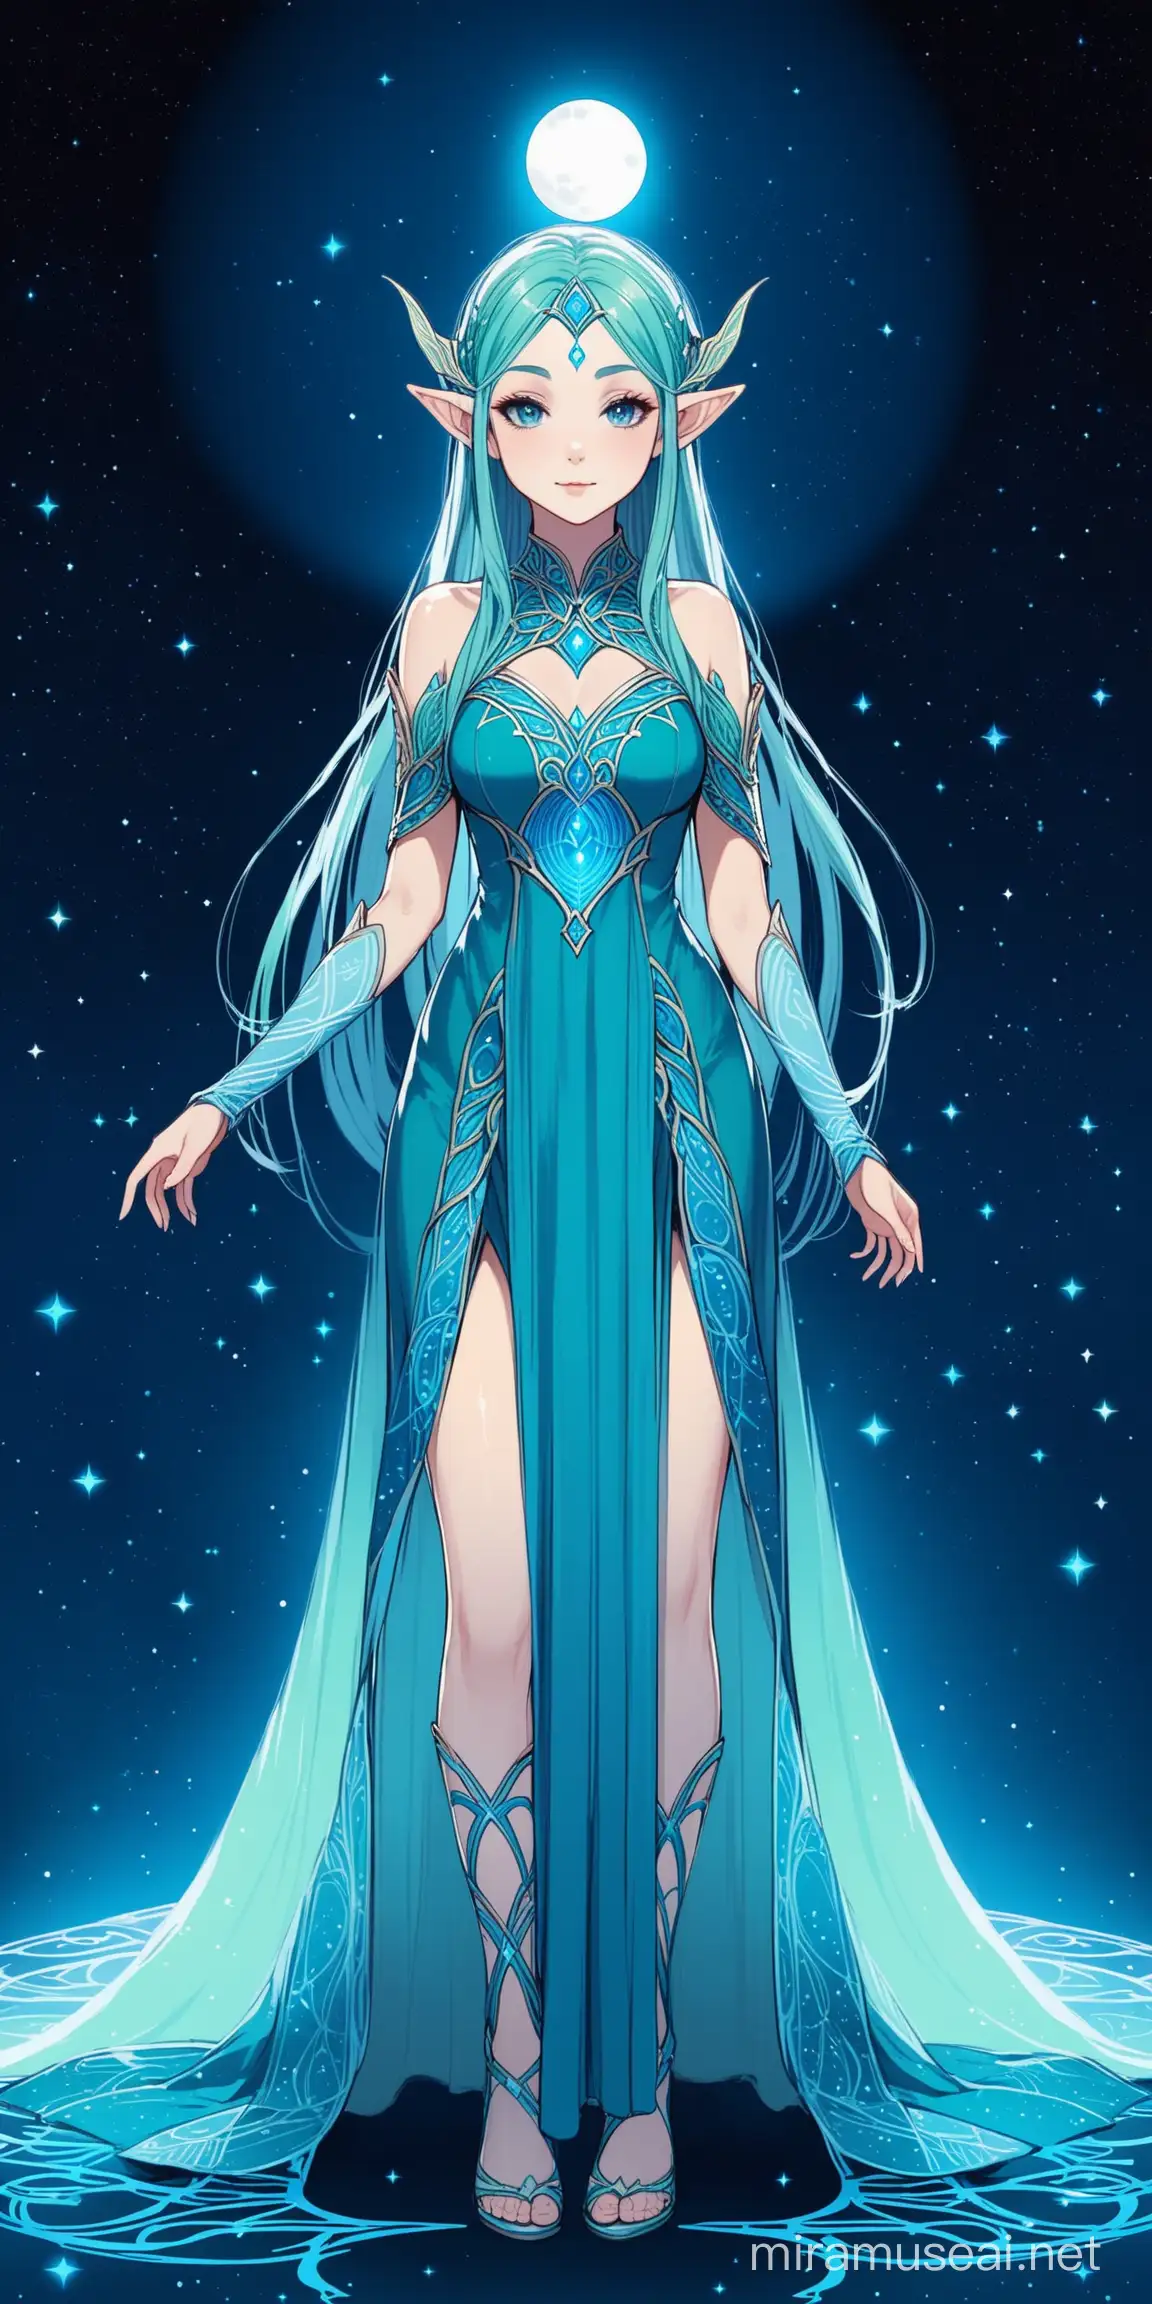 Elven Girl in MoonThemed Dress Poses FrontFacing in Blue Colors